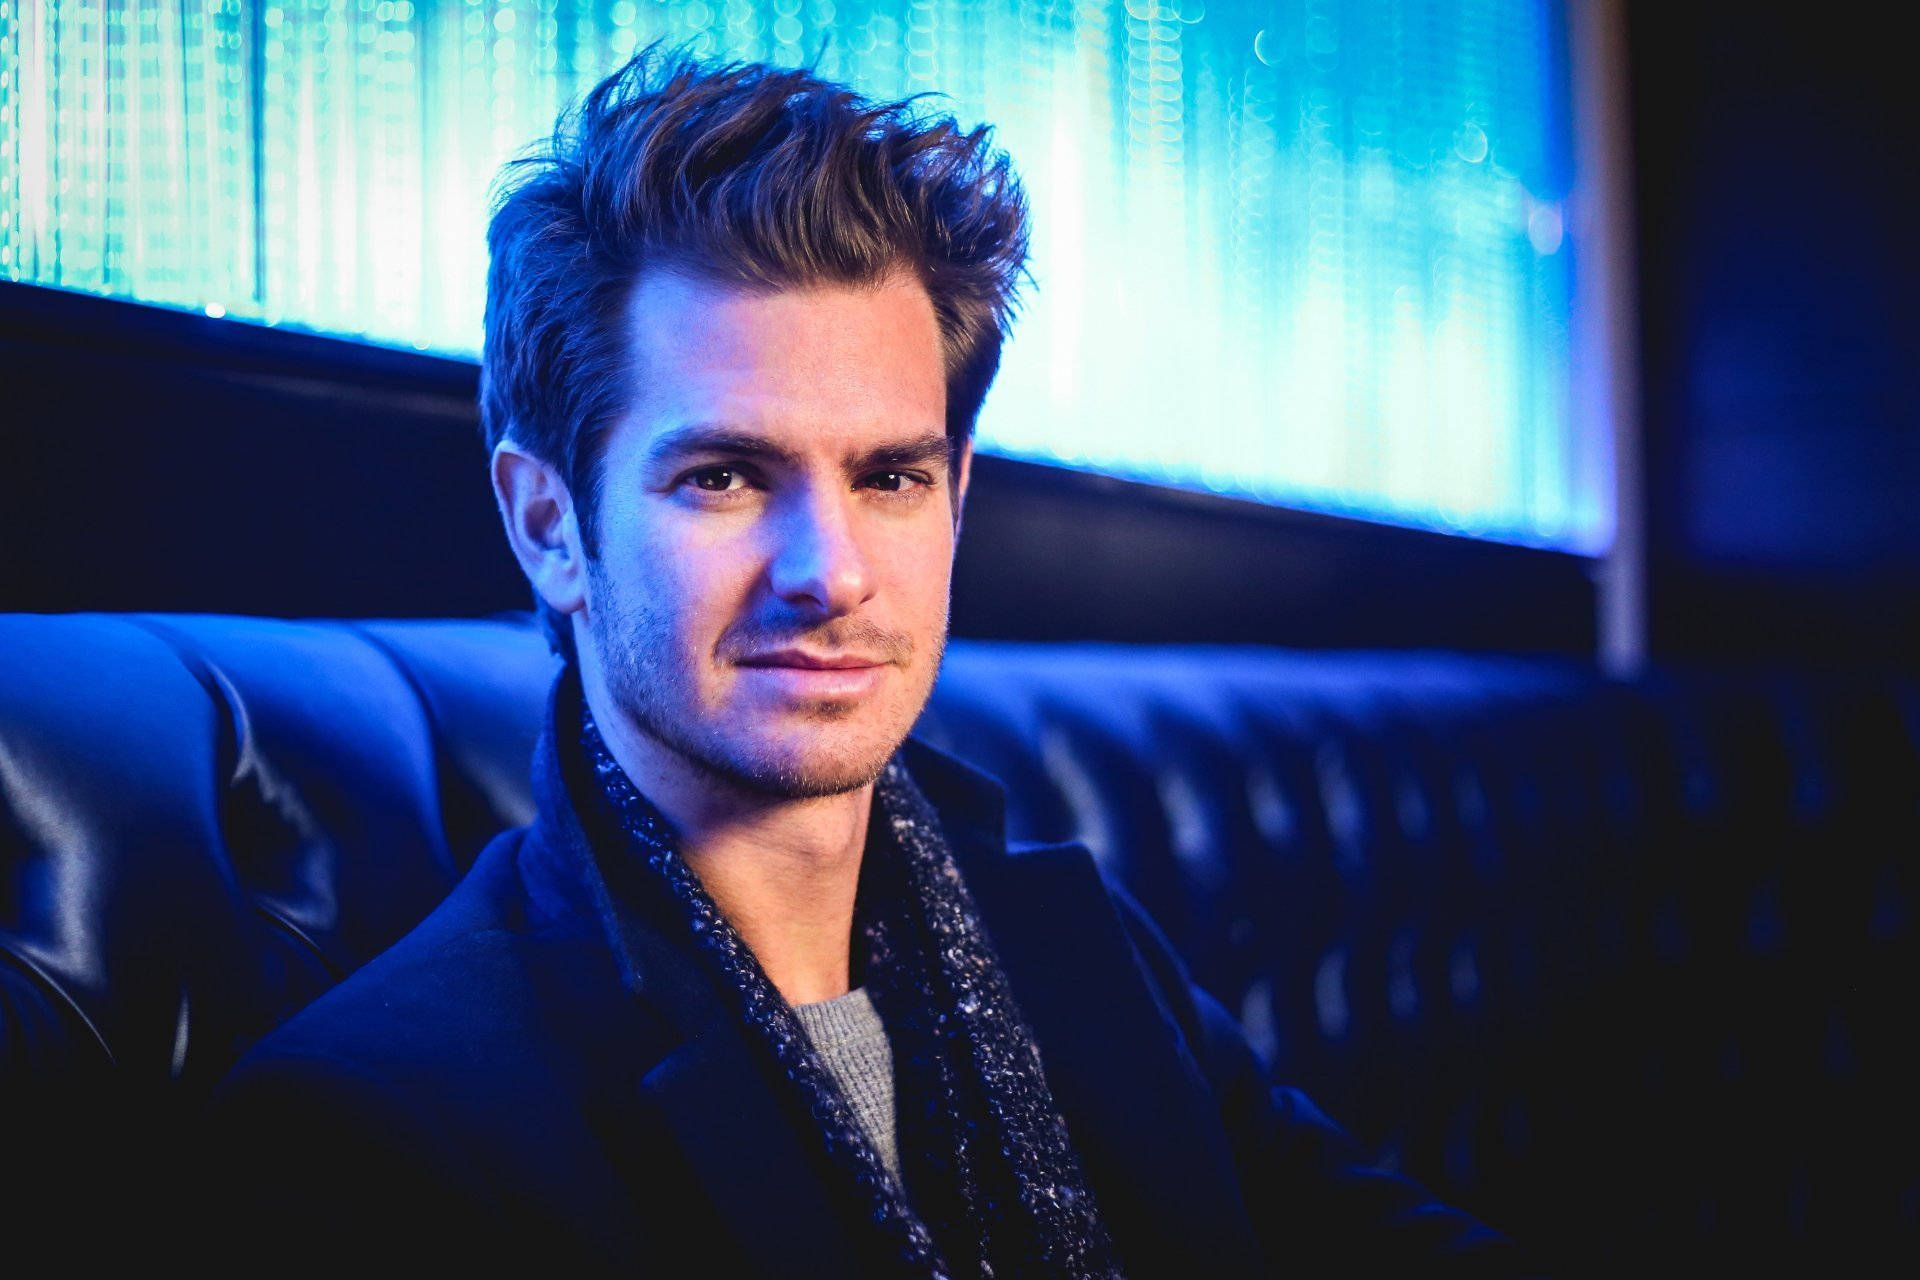 Andrew Garfield is a 37-year-old actor who was born in New York City. He is best known for his roles in The Social Network, 99 Homes, and 96 Streets. - Andrew Garfield